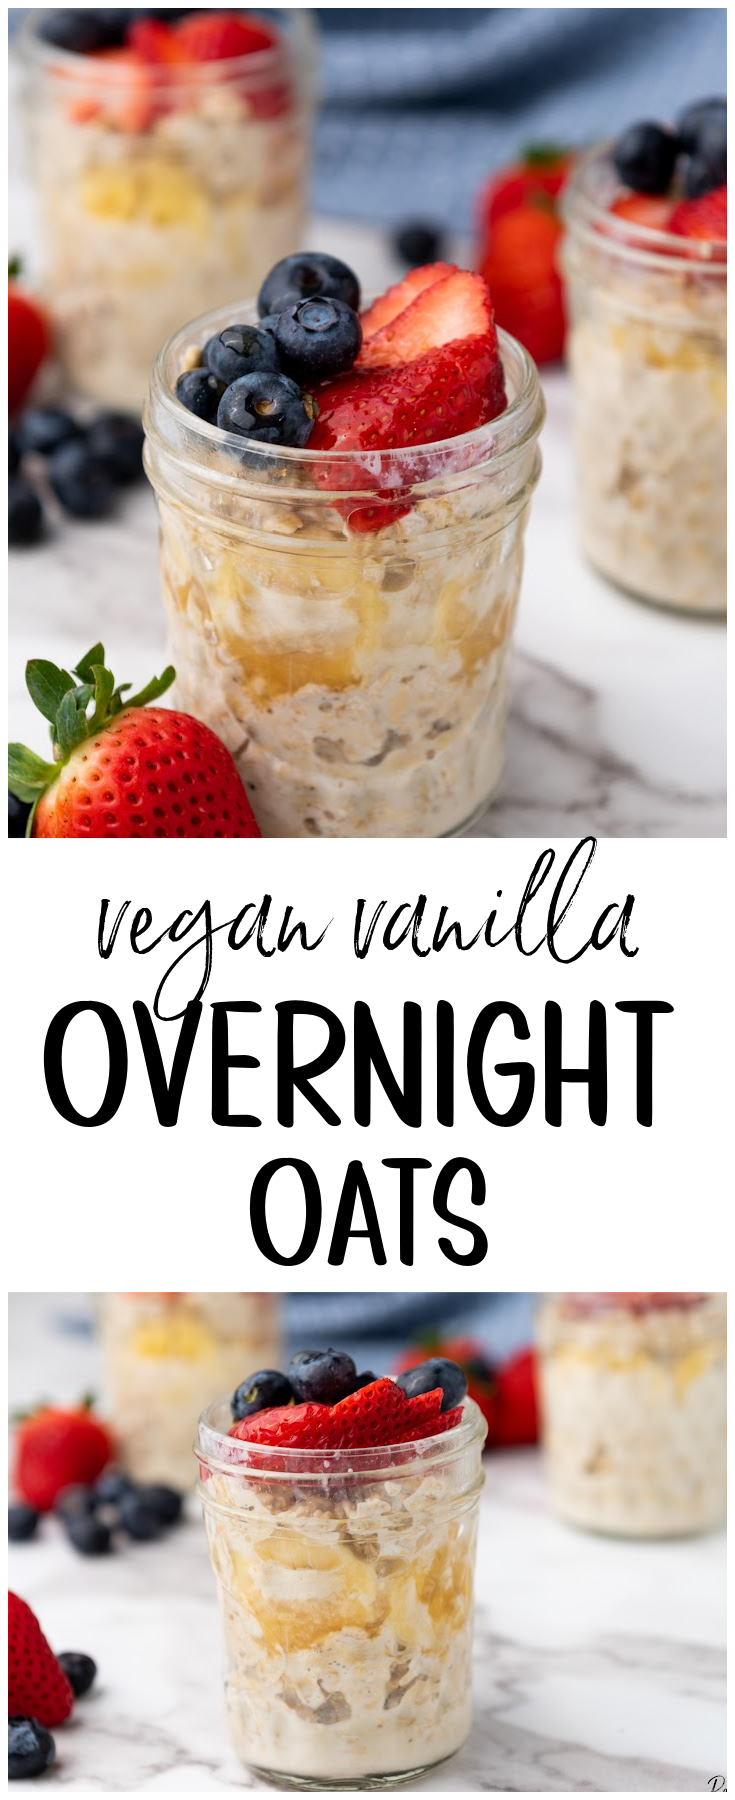 Vegan Vanilla Overnight Oats - a simple recipe that's healthy and easily prepared the night before - perfect for busy mornings!   #vegan #overnightoats #oatmeal #breakfast #healthy